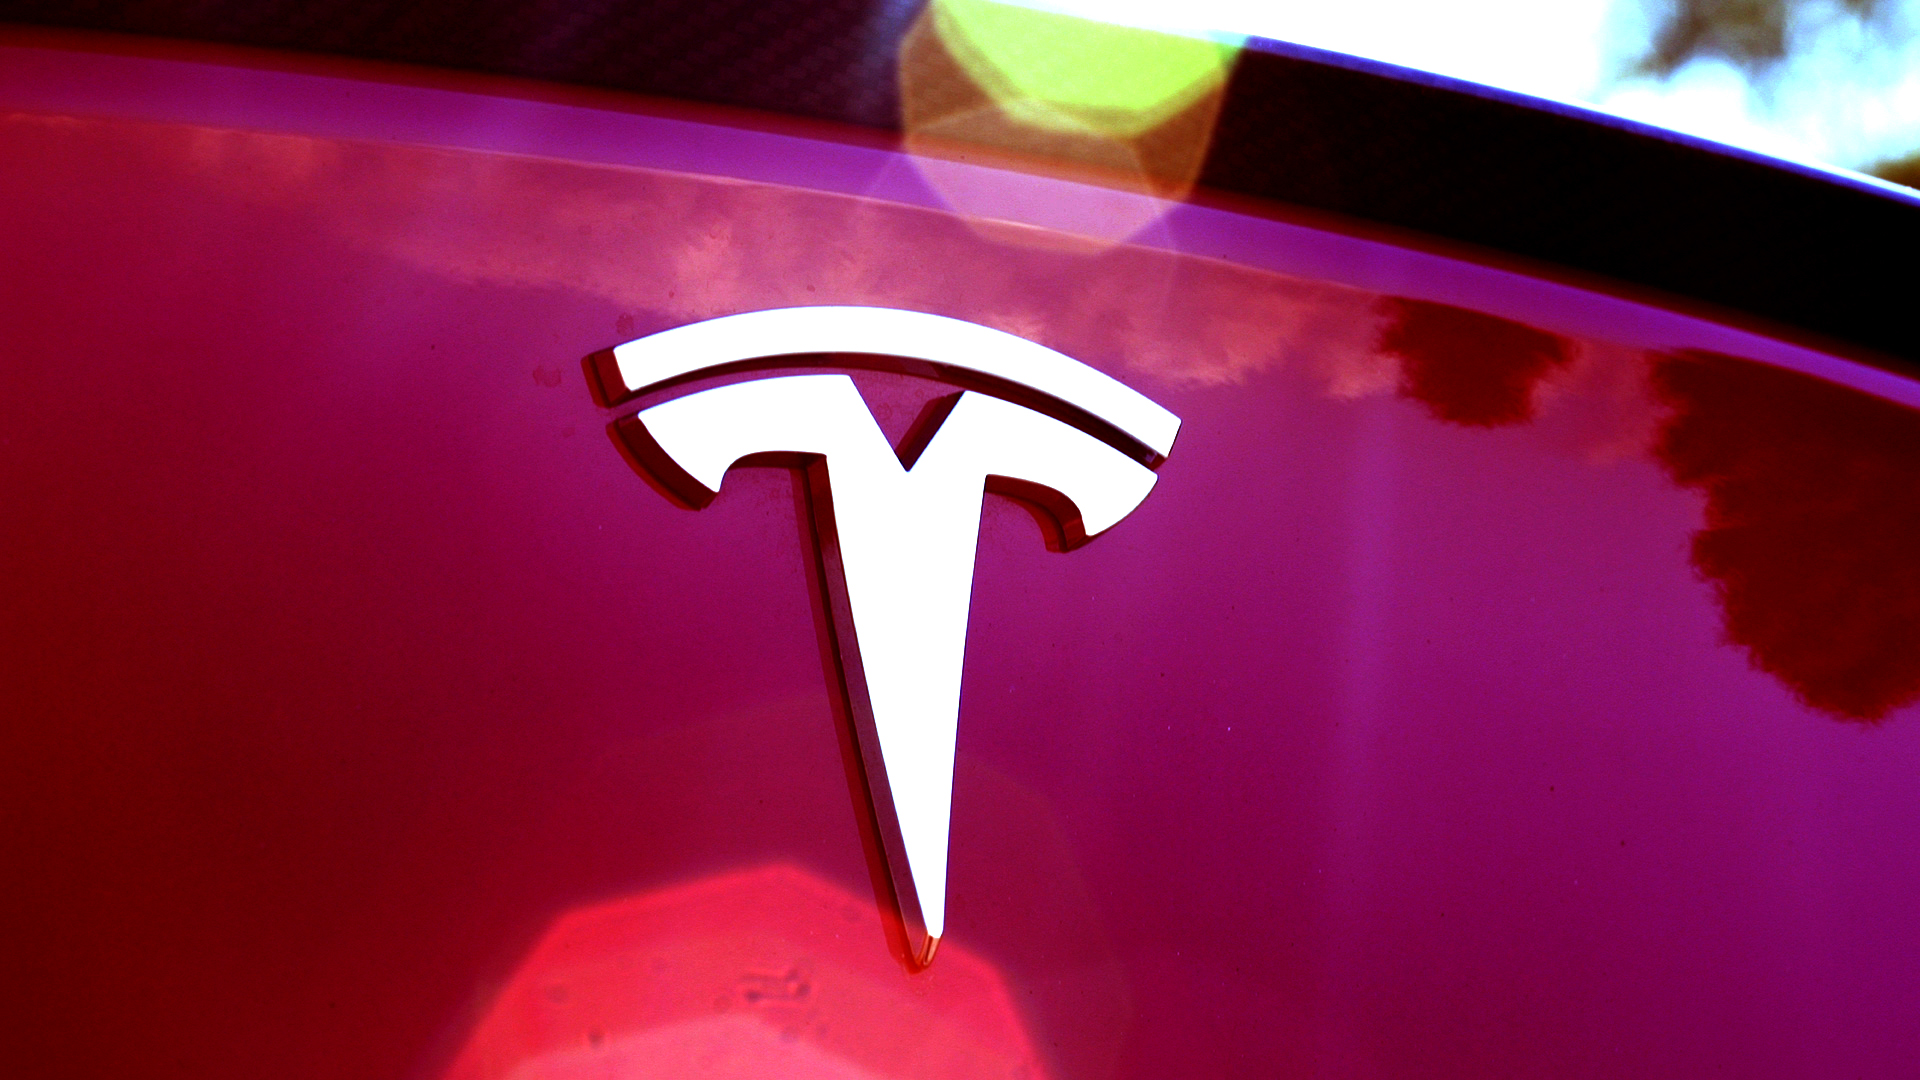 Tesla Updating Autopilot Feature With Radar, Driver Engagement Safety Check